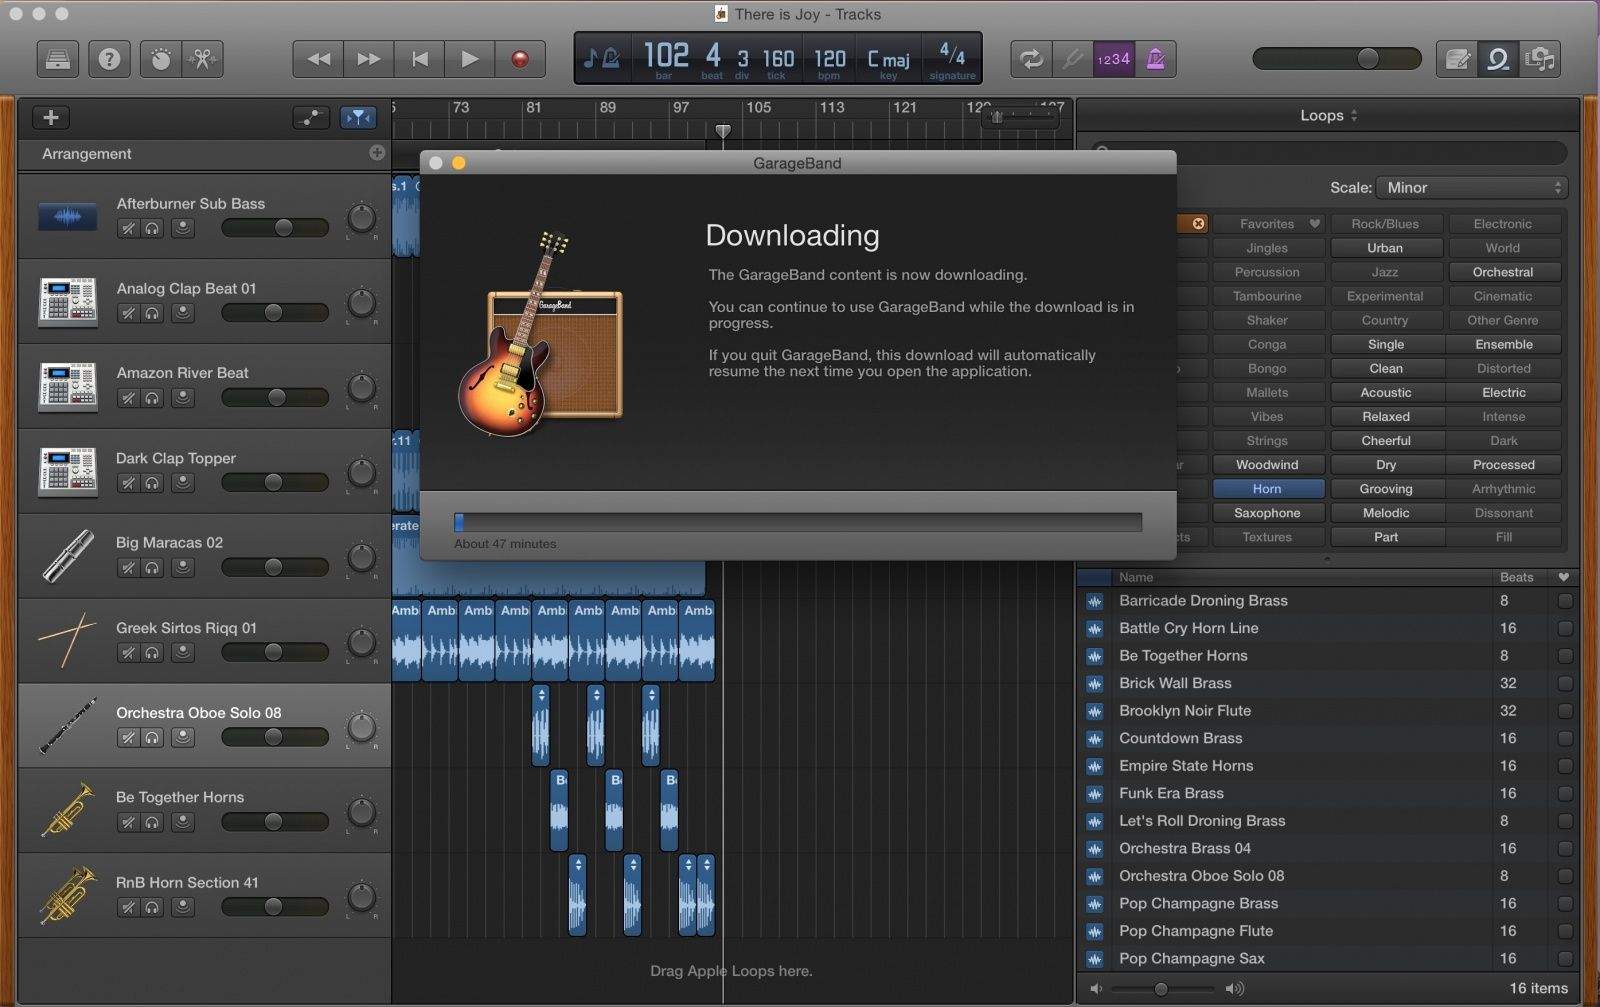 How To Stop Garageband From Downloading